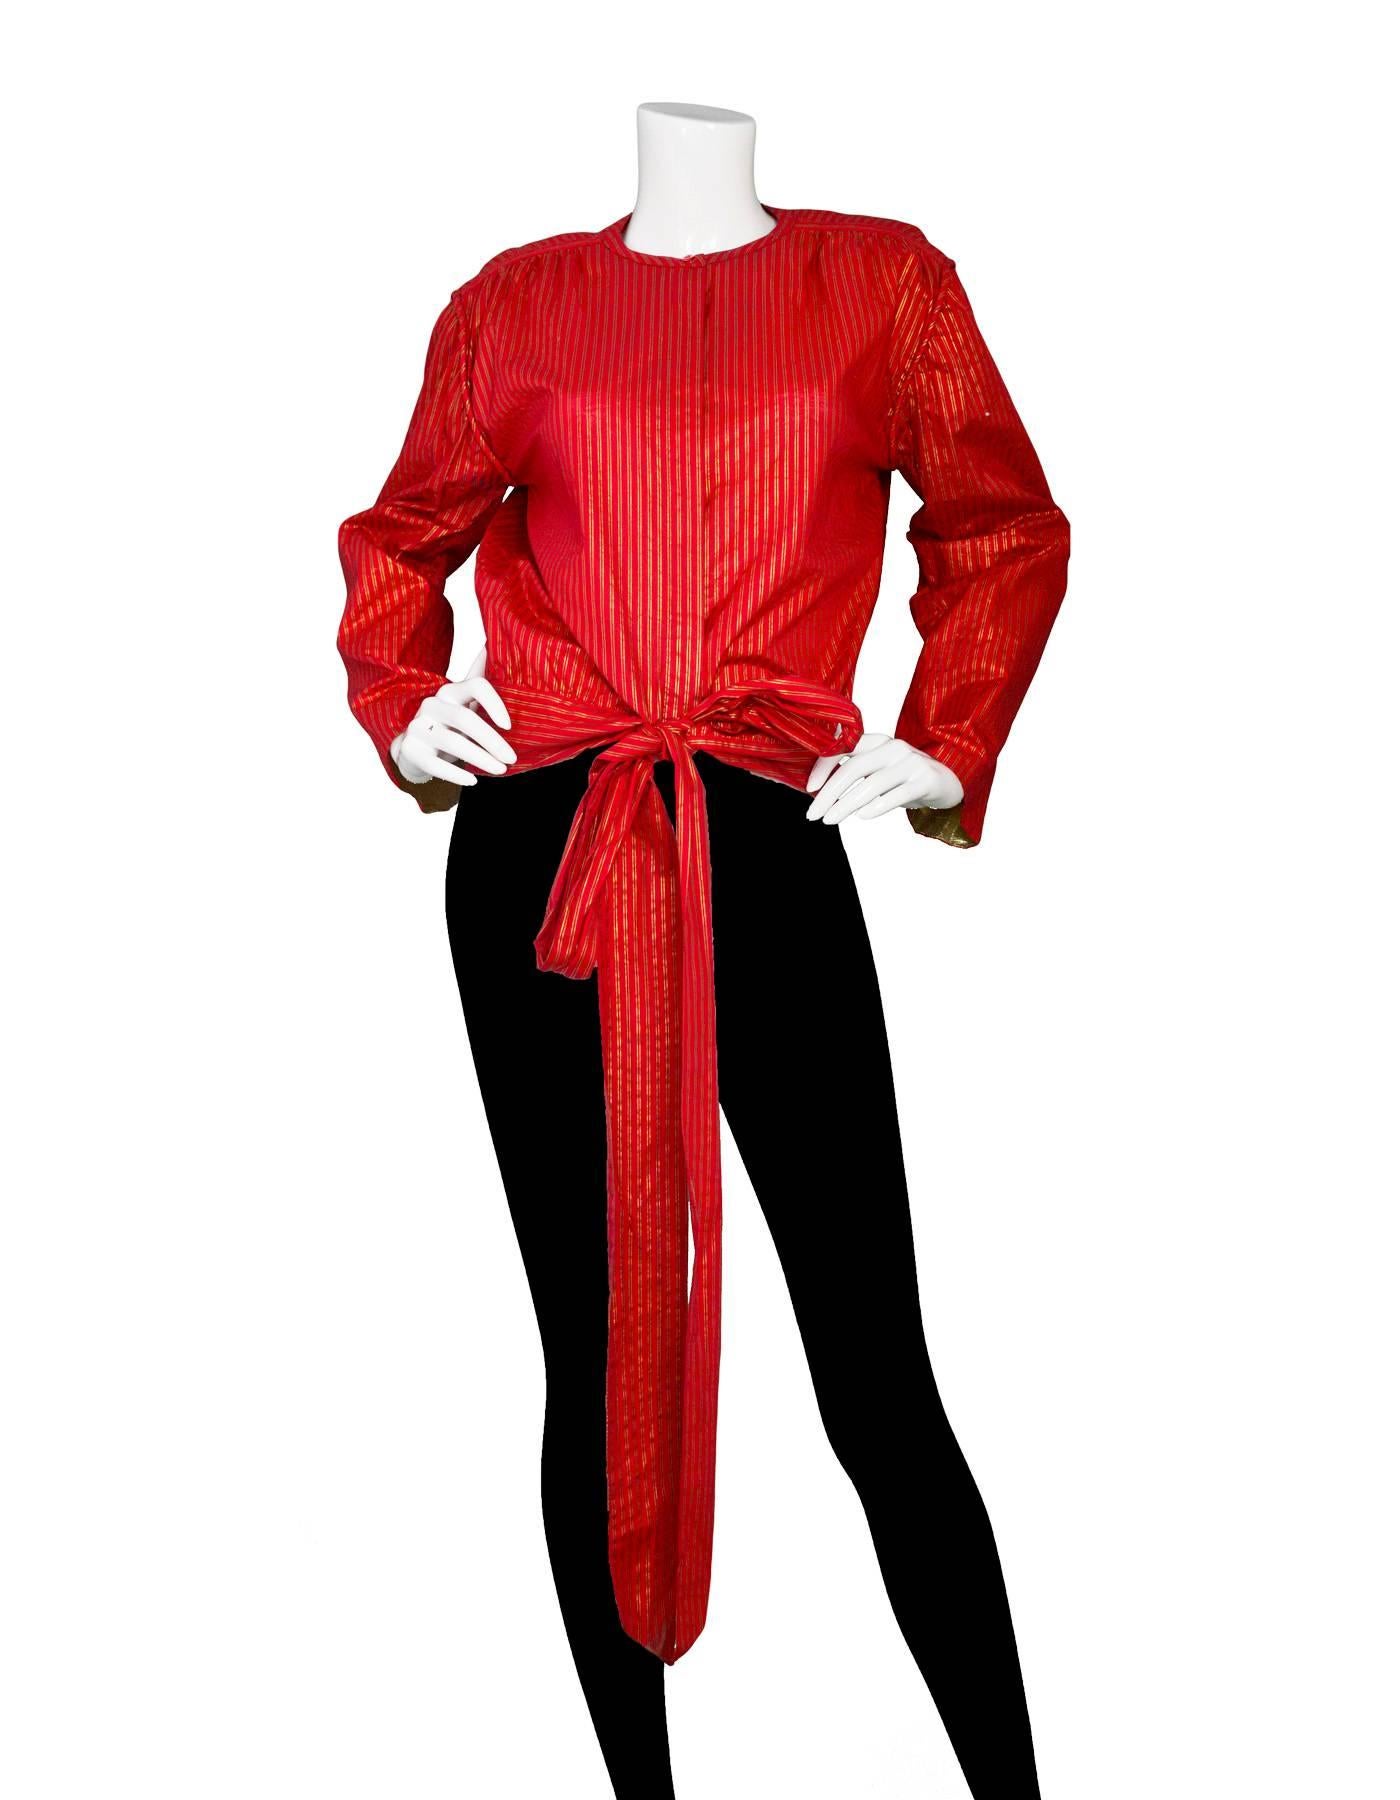 Giorgio Armani Vintage Red & Gold Stripe Wrap Blouse 
Features gold lame detail on lining of sleeves

Made In: Italy
Color: Red and metallic gold
Composition: 100% cotton
Lining: None
Closure/Opening: Button down closure with wrap tie at